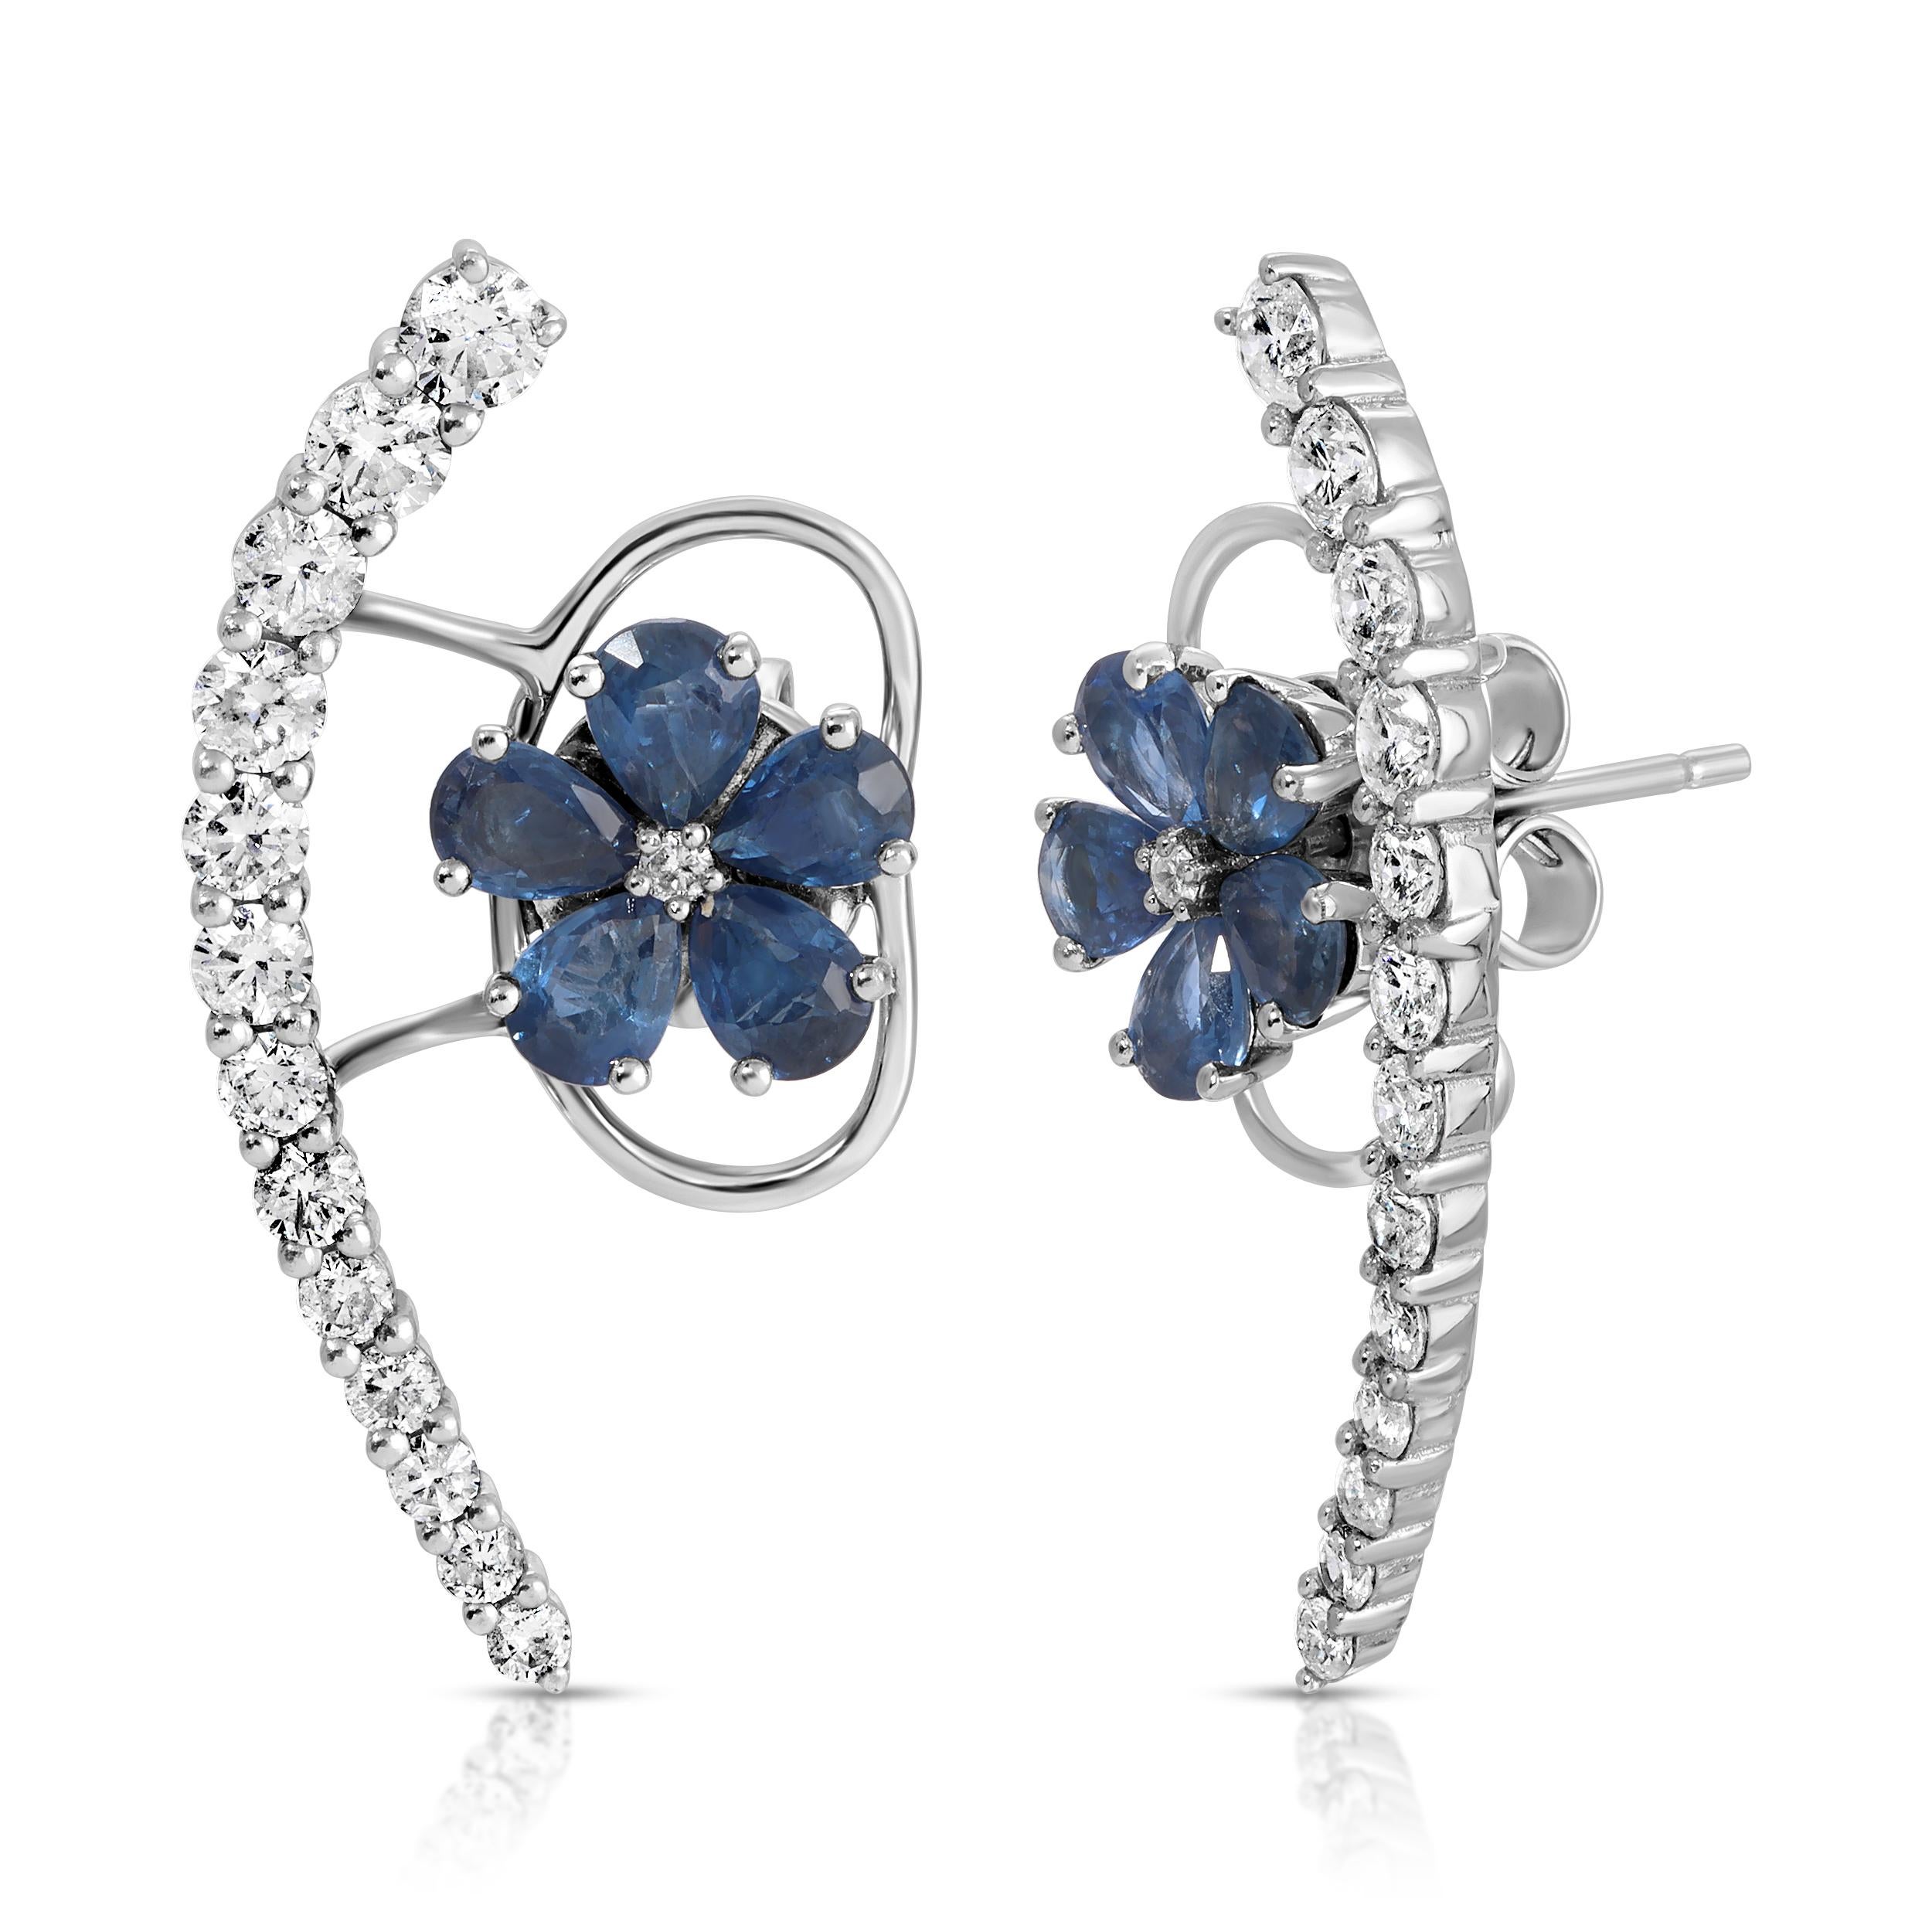 Earring Information
Diamond Type : Natural Diamond
Metal : 18K
Metal Color : White Gold
Diamond Carat Weight : 0.98ttcw
Gemstone Count : 10

Introducing our mesmerizing diamond and sapphire earrings, a captivating fusion of elegance and luxury.